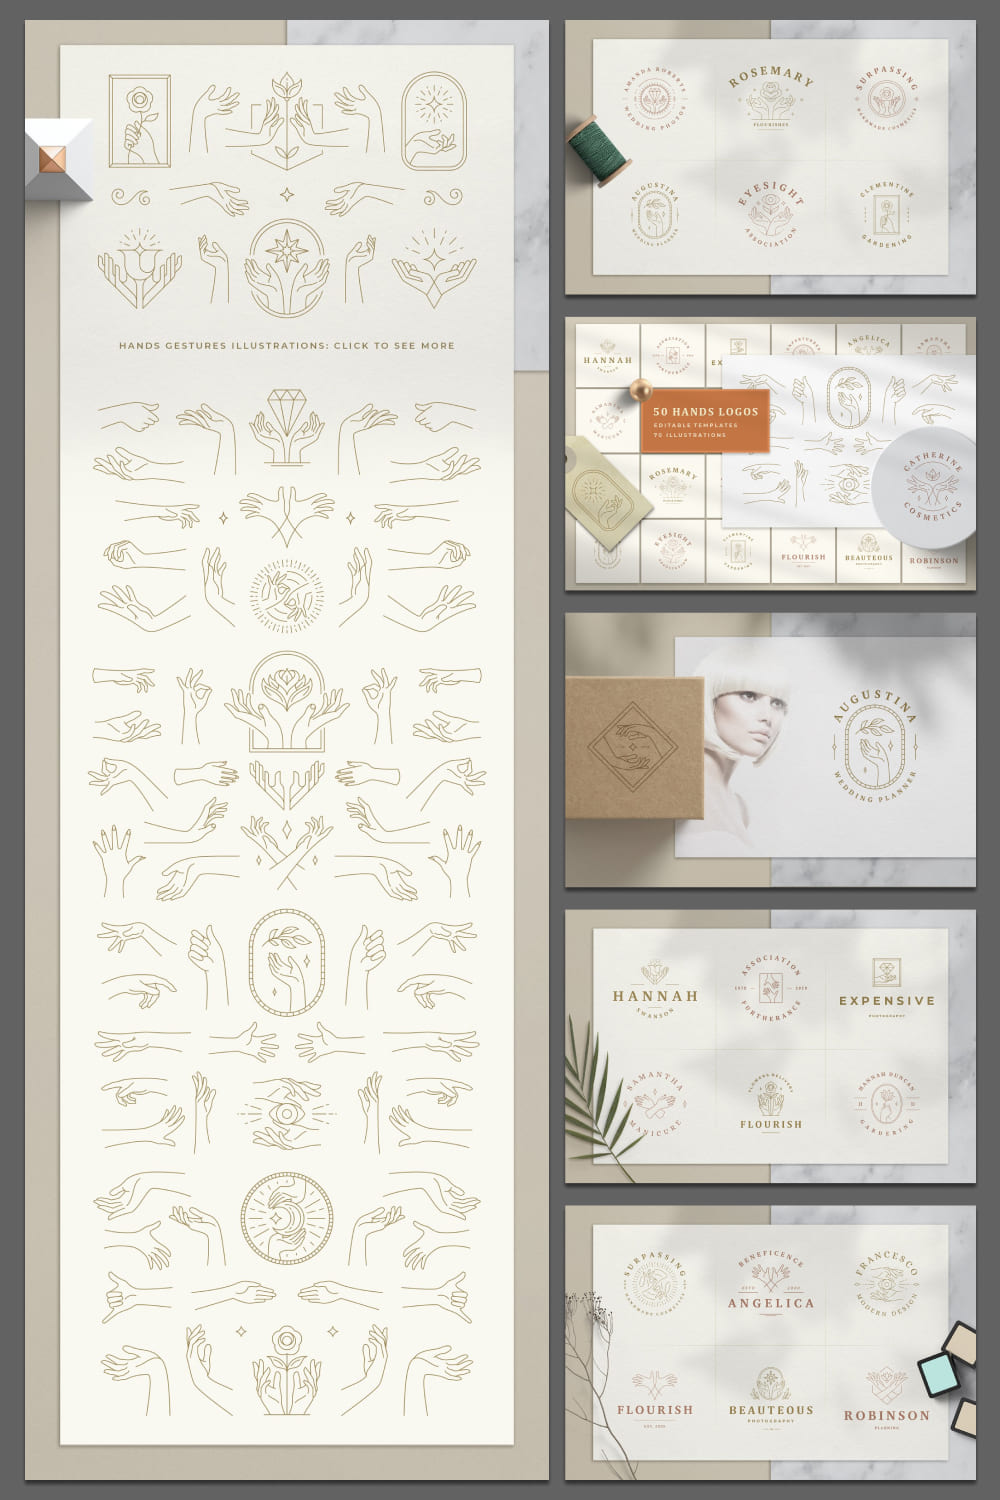 hands logos templates bundle great for beauty sphere.